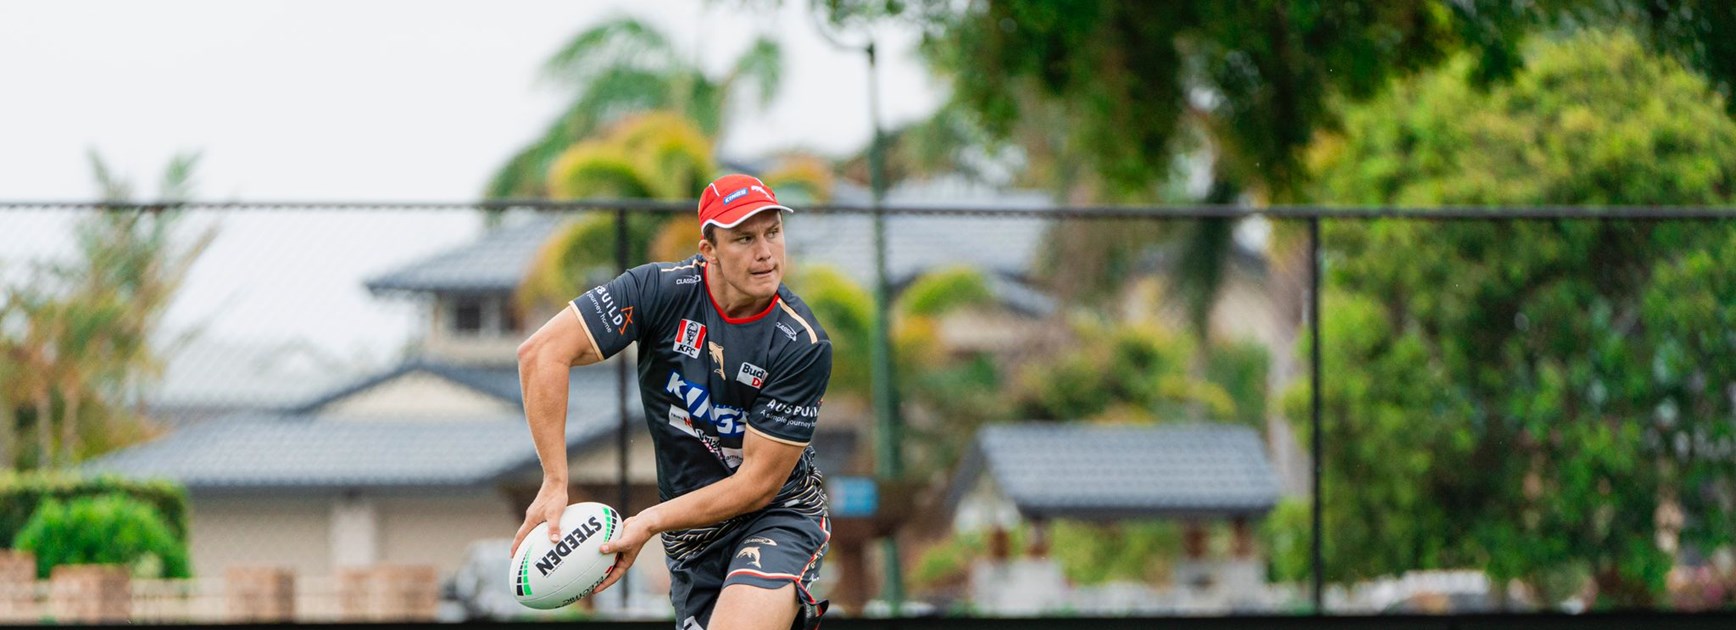 Bailey at NRL Dolphins training. Photo: Dolphins/NRL